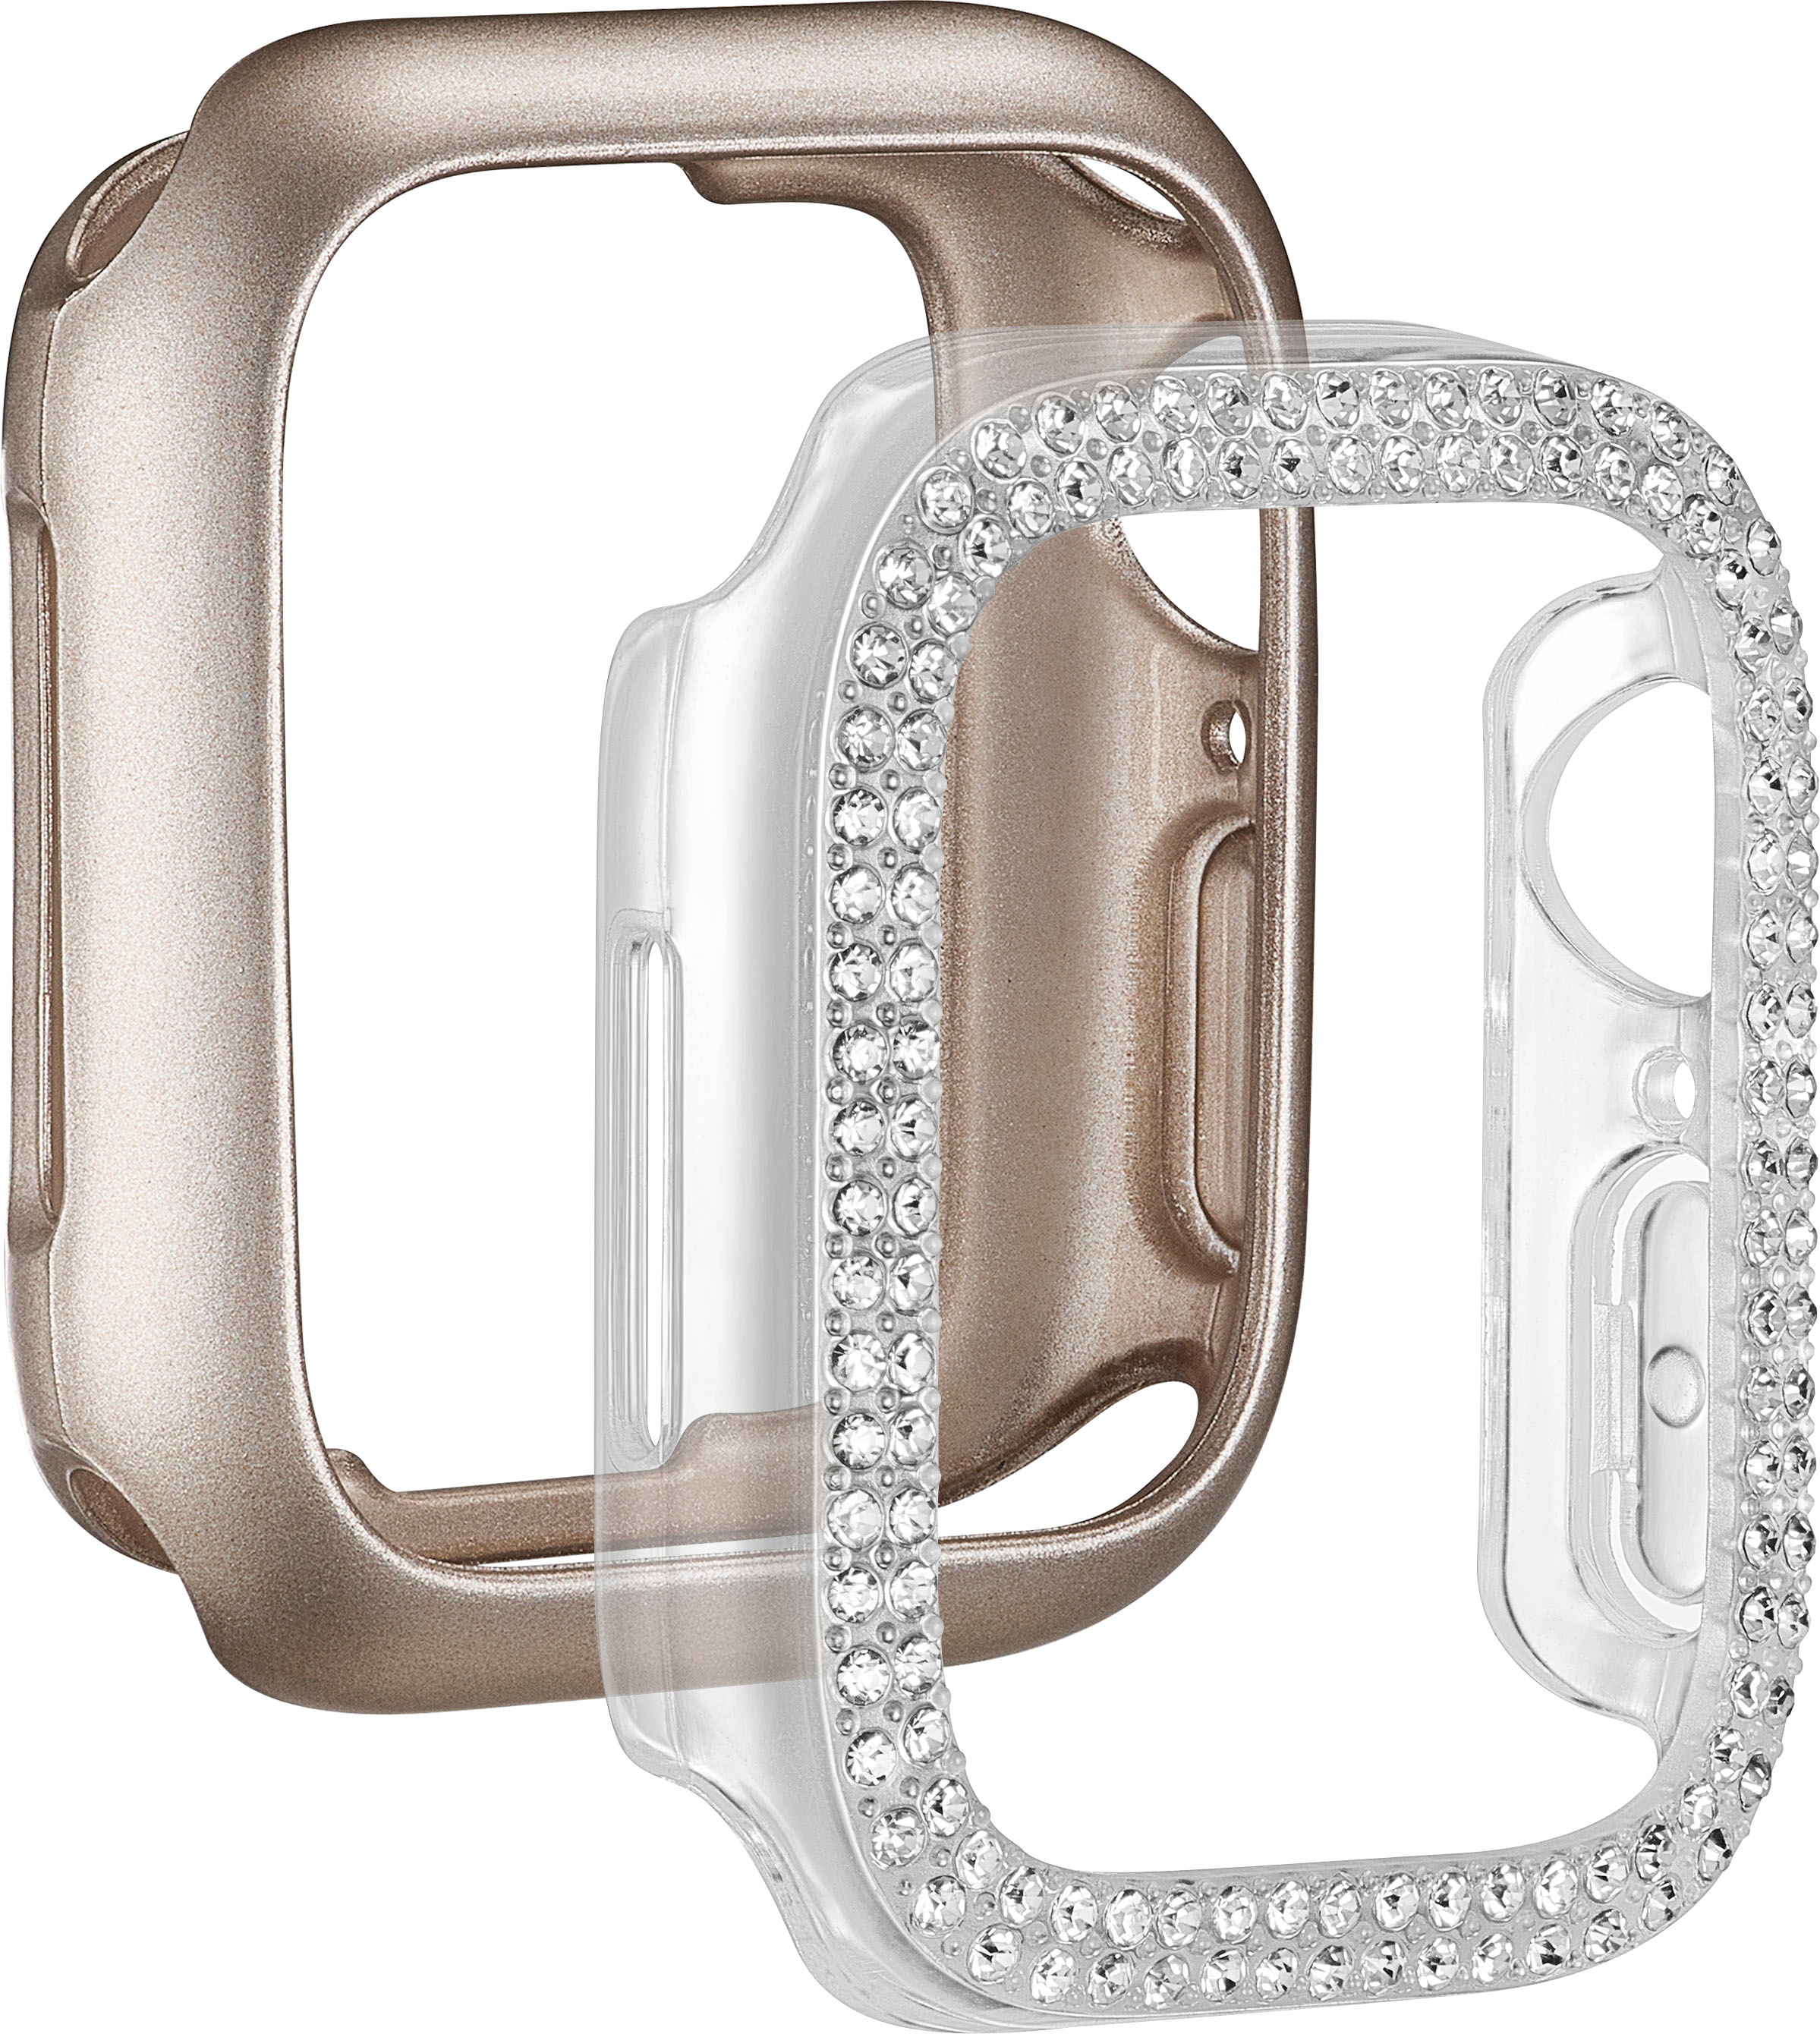 Angle View: Insignia™ - Bumper Cases for Apple Watch 41mm (2-Pack) - Bling/Champagne